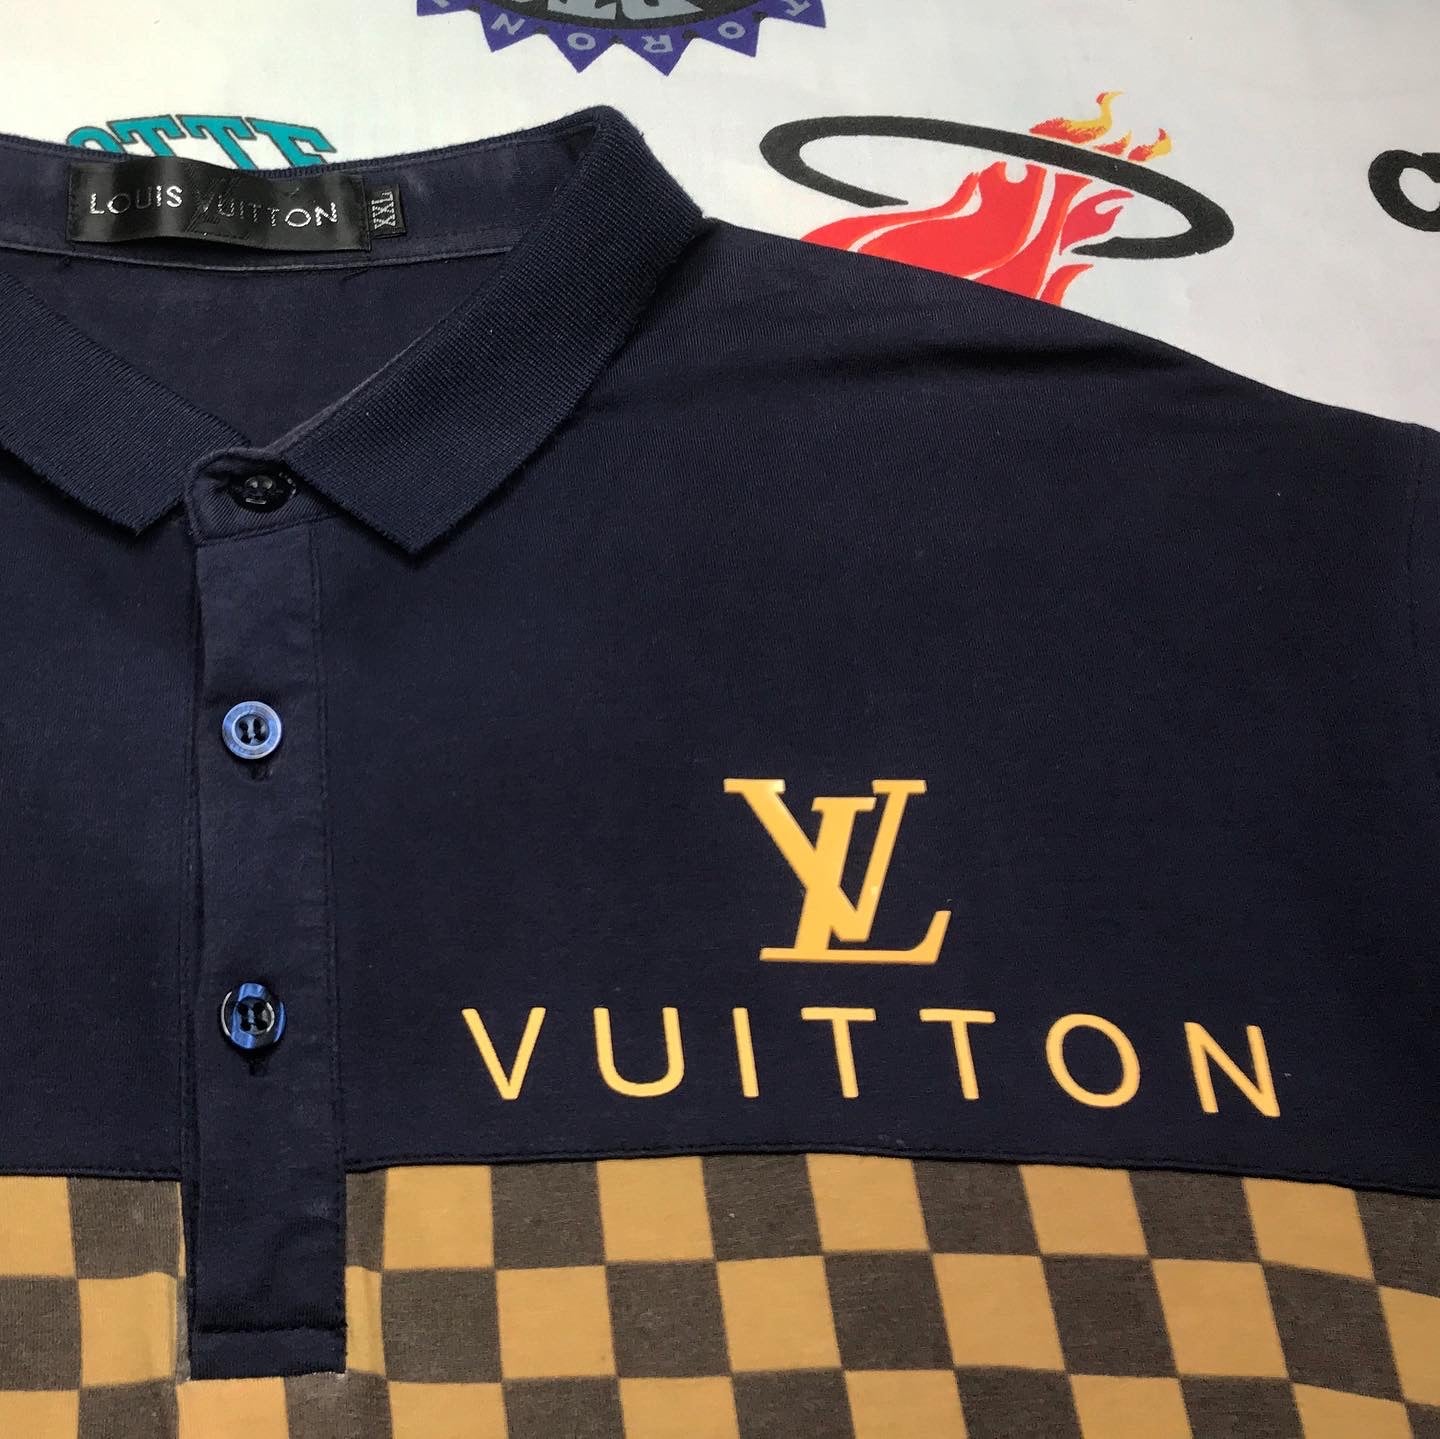 NEW] Louis Vuitton Groove Texture Luxury Premium For Men LV Polo Shirt -  Macall Cloth Store - Destination for fashionistas